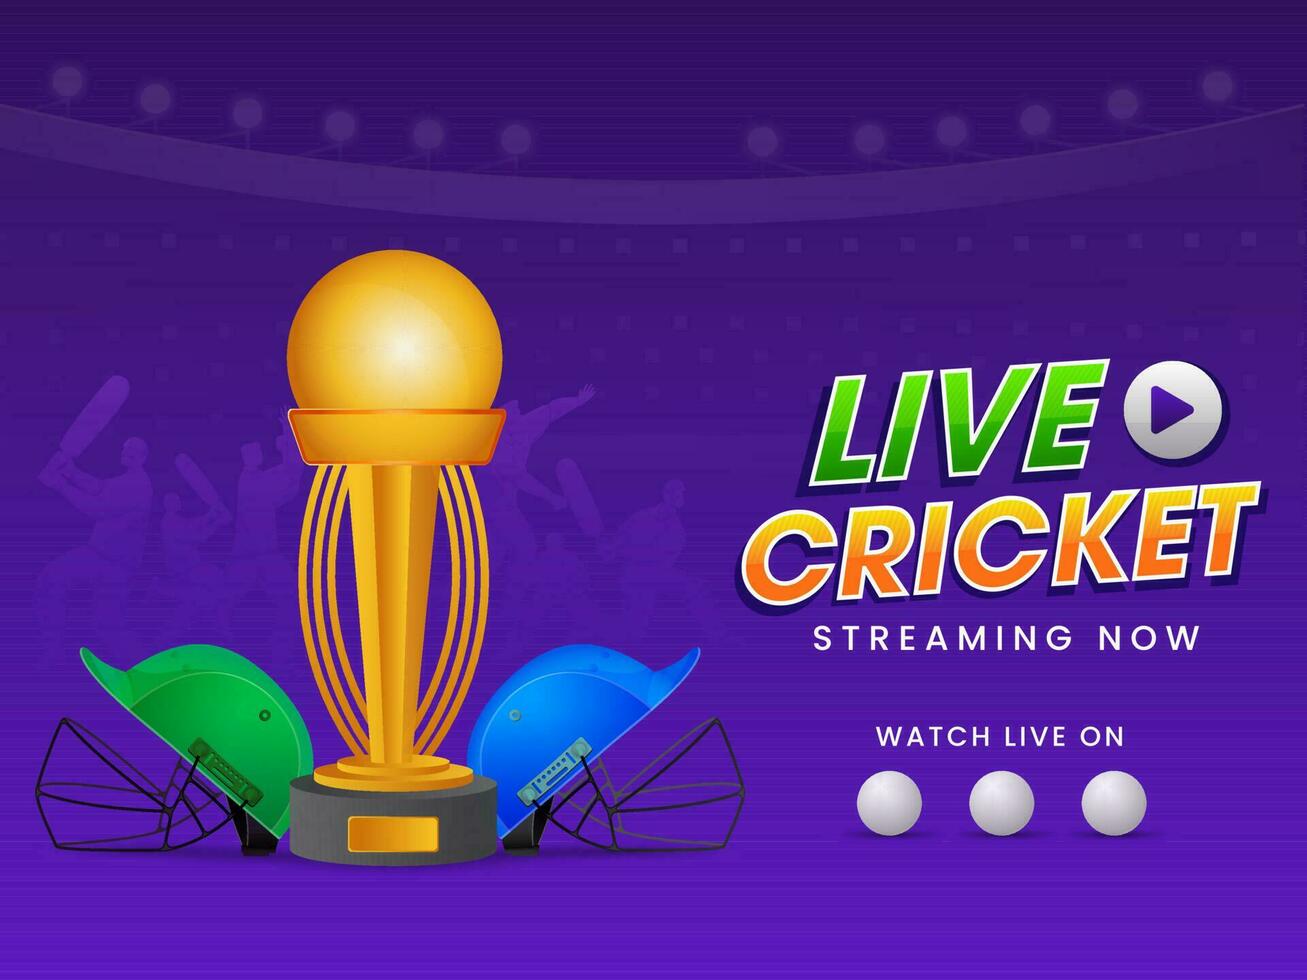 Live Cricket Streaming Now Poster Design With Golden Trophy Cup And Participate Two Helmets On Purple Background